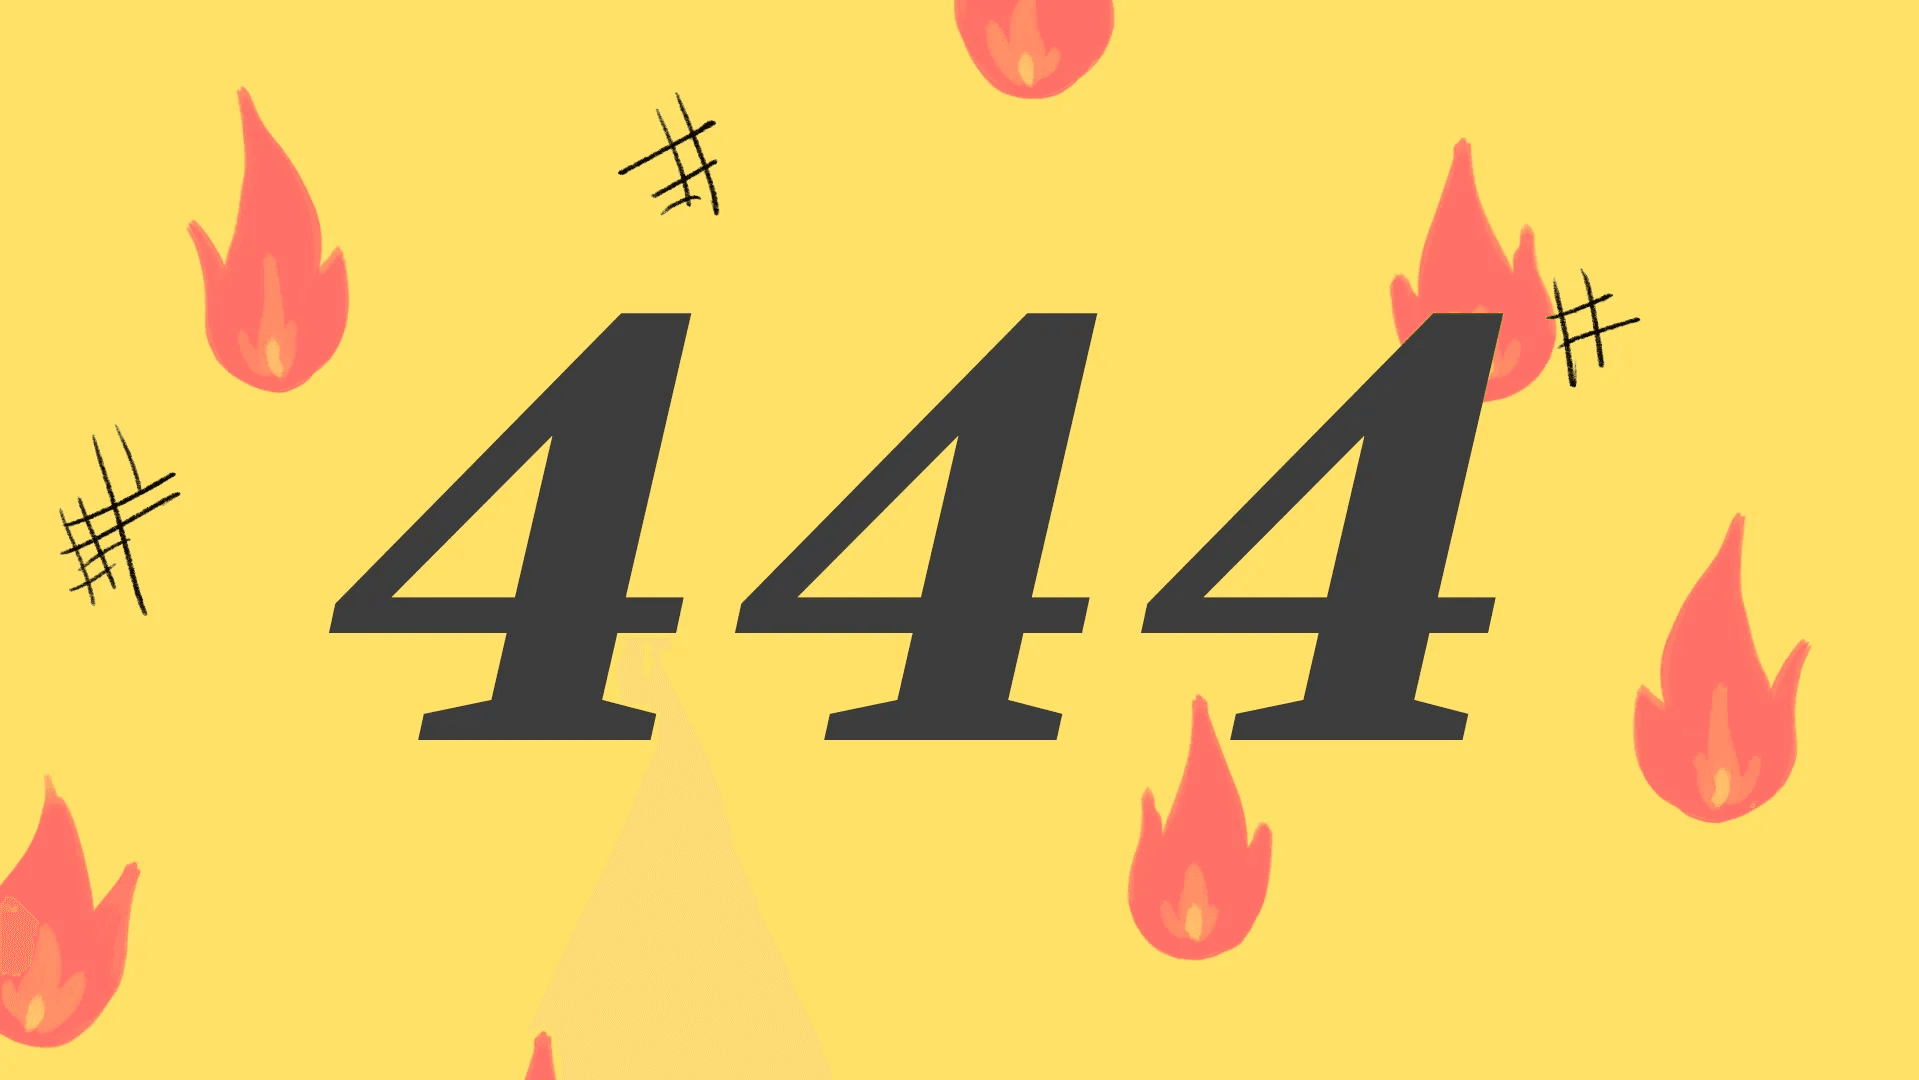 Meaning and Significance of 444 in Numerology